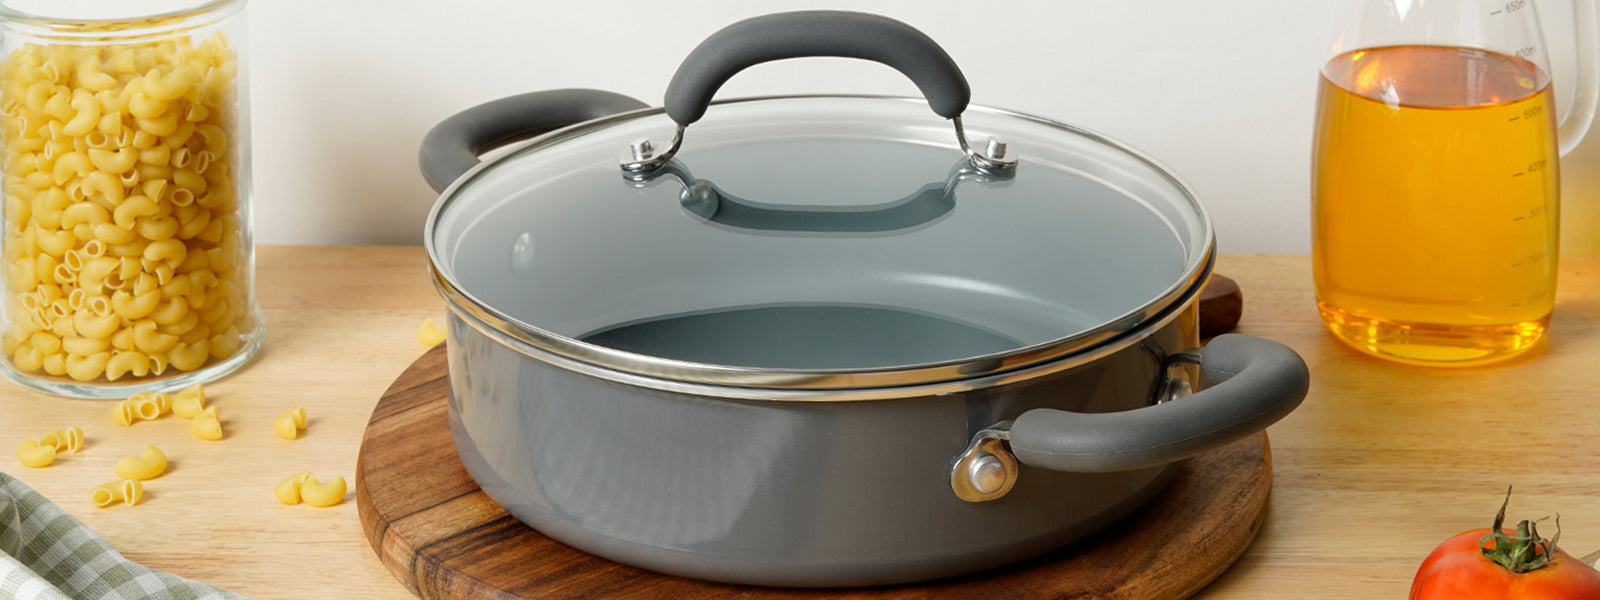 The Best Non-Toxic Cookware for Healthy Cooking